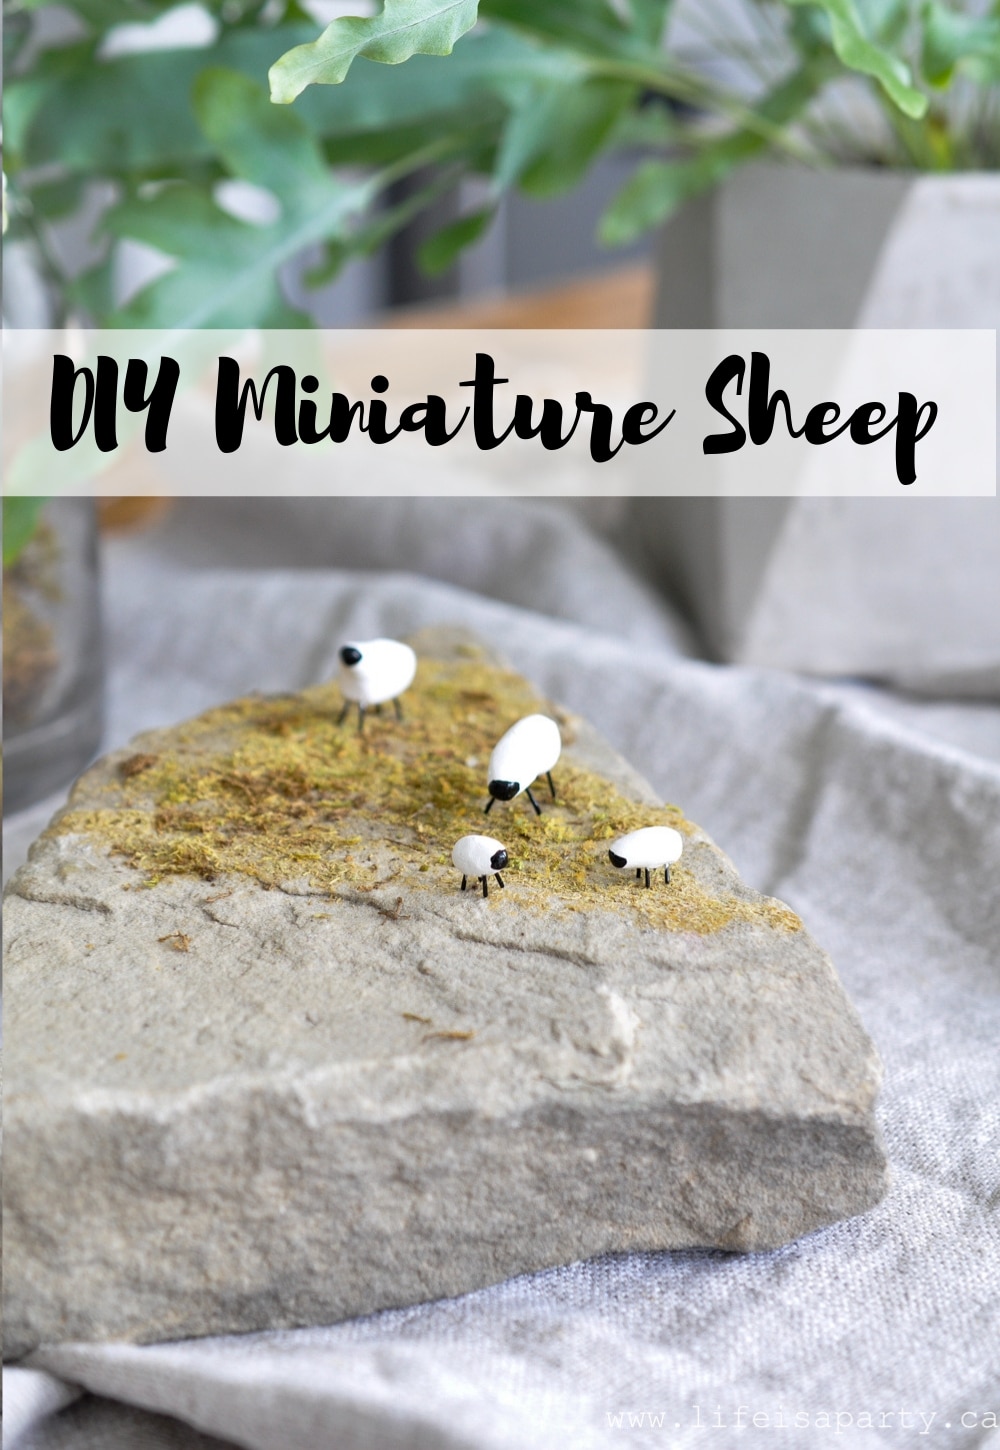 DIY Miniature Sheep: full tutorial for these easy to make sheep, made from polymer clay and staples. A beautiful addition to your spring decor.